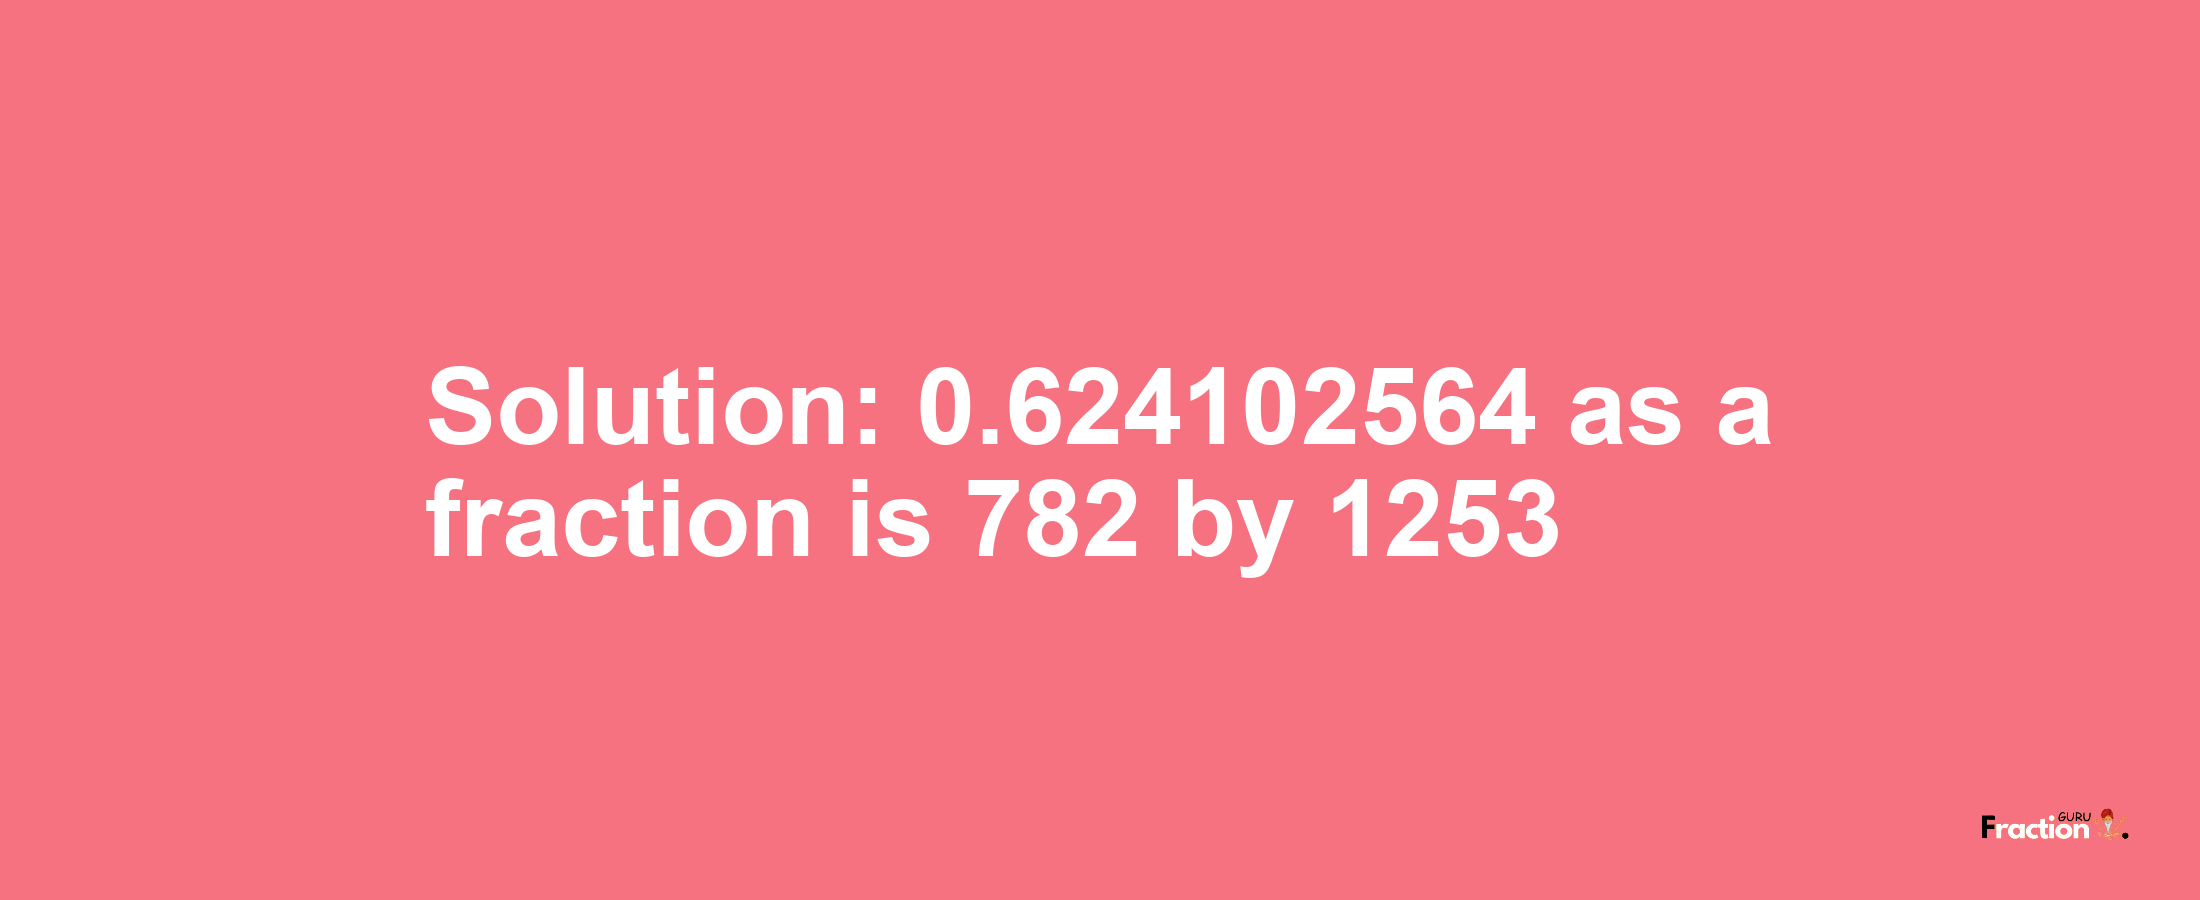 Solution:0.624102564 as a fraction is 782/1253